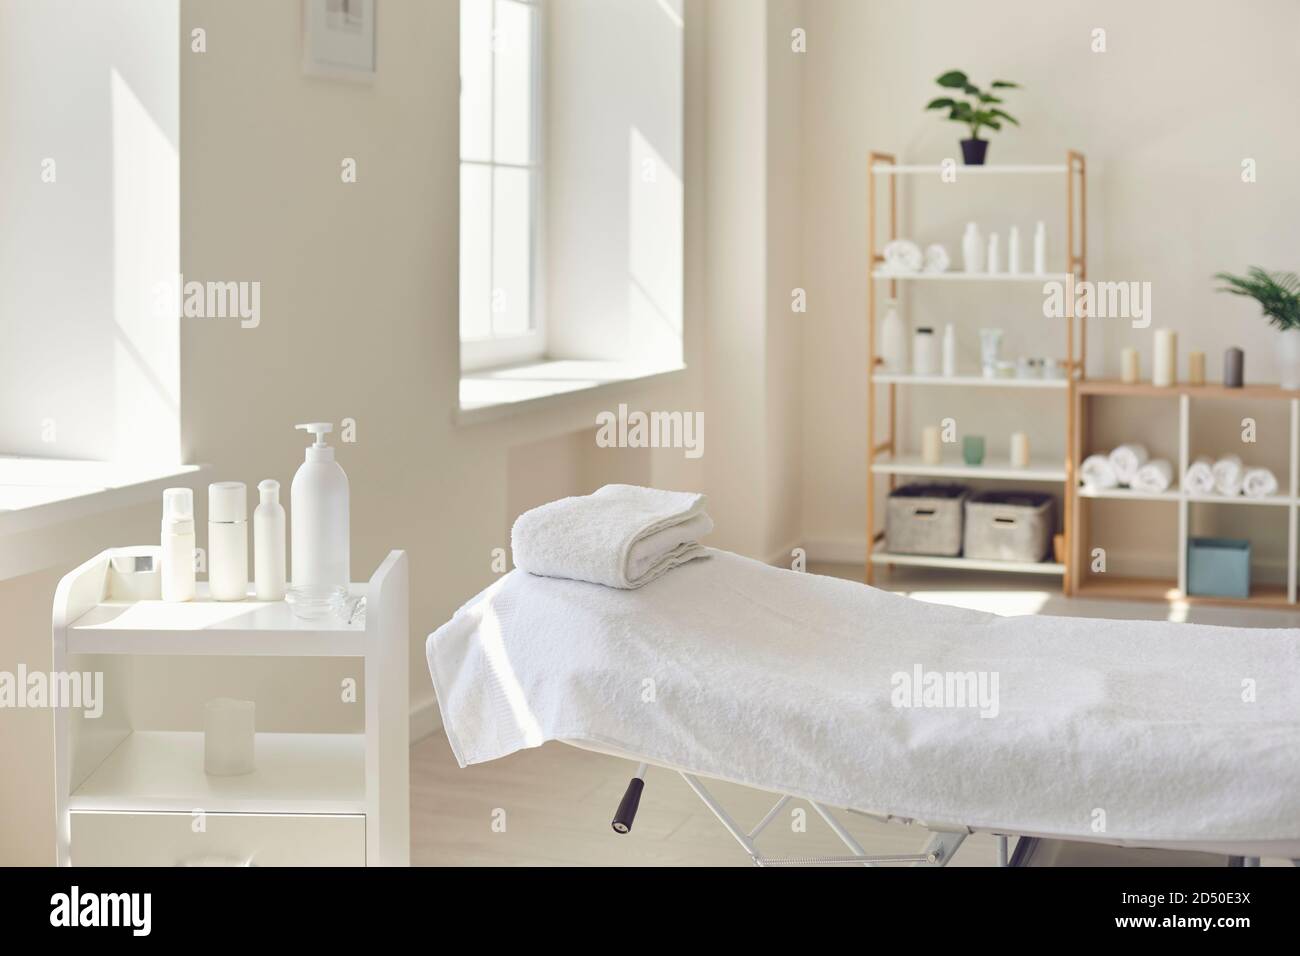 Massage room or beauty parlor with empty bed and ready set of organic skincare products Stock Photo